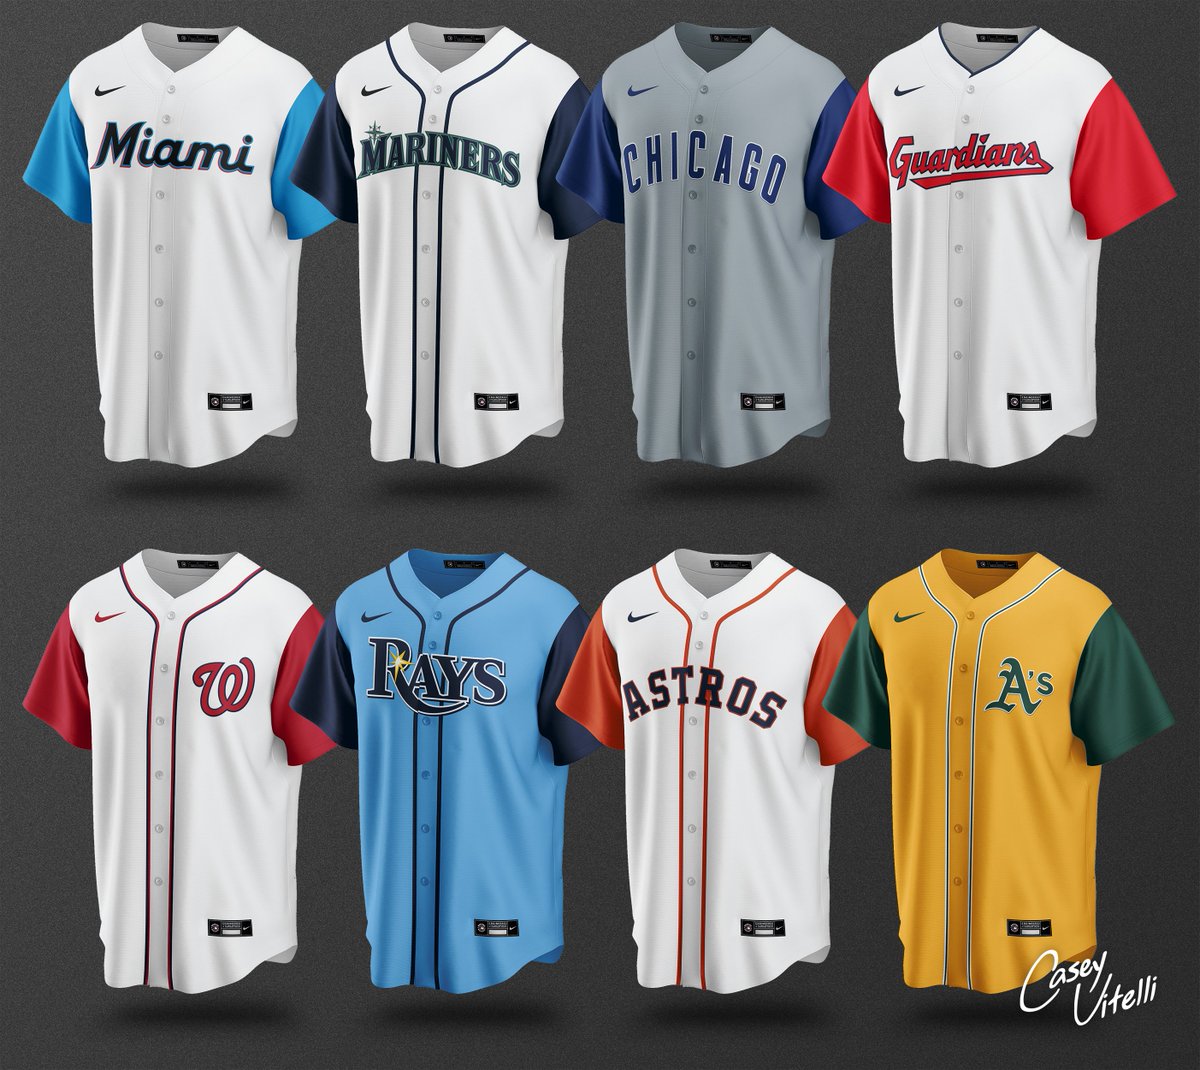 Vest Concept:
Miami Marlins
Seattle Mariners
Chicago Cubs
Cleveland Guardians
Washington Nationals
Tampa Bay Rays
Houston Astros
Oakland Athletics https://t.co/OR0bA0mRls https://t.co/50OIO65JU2